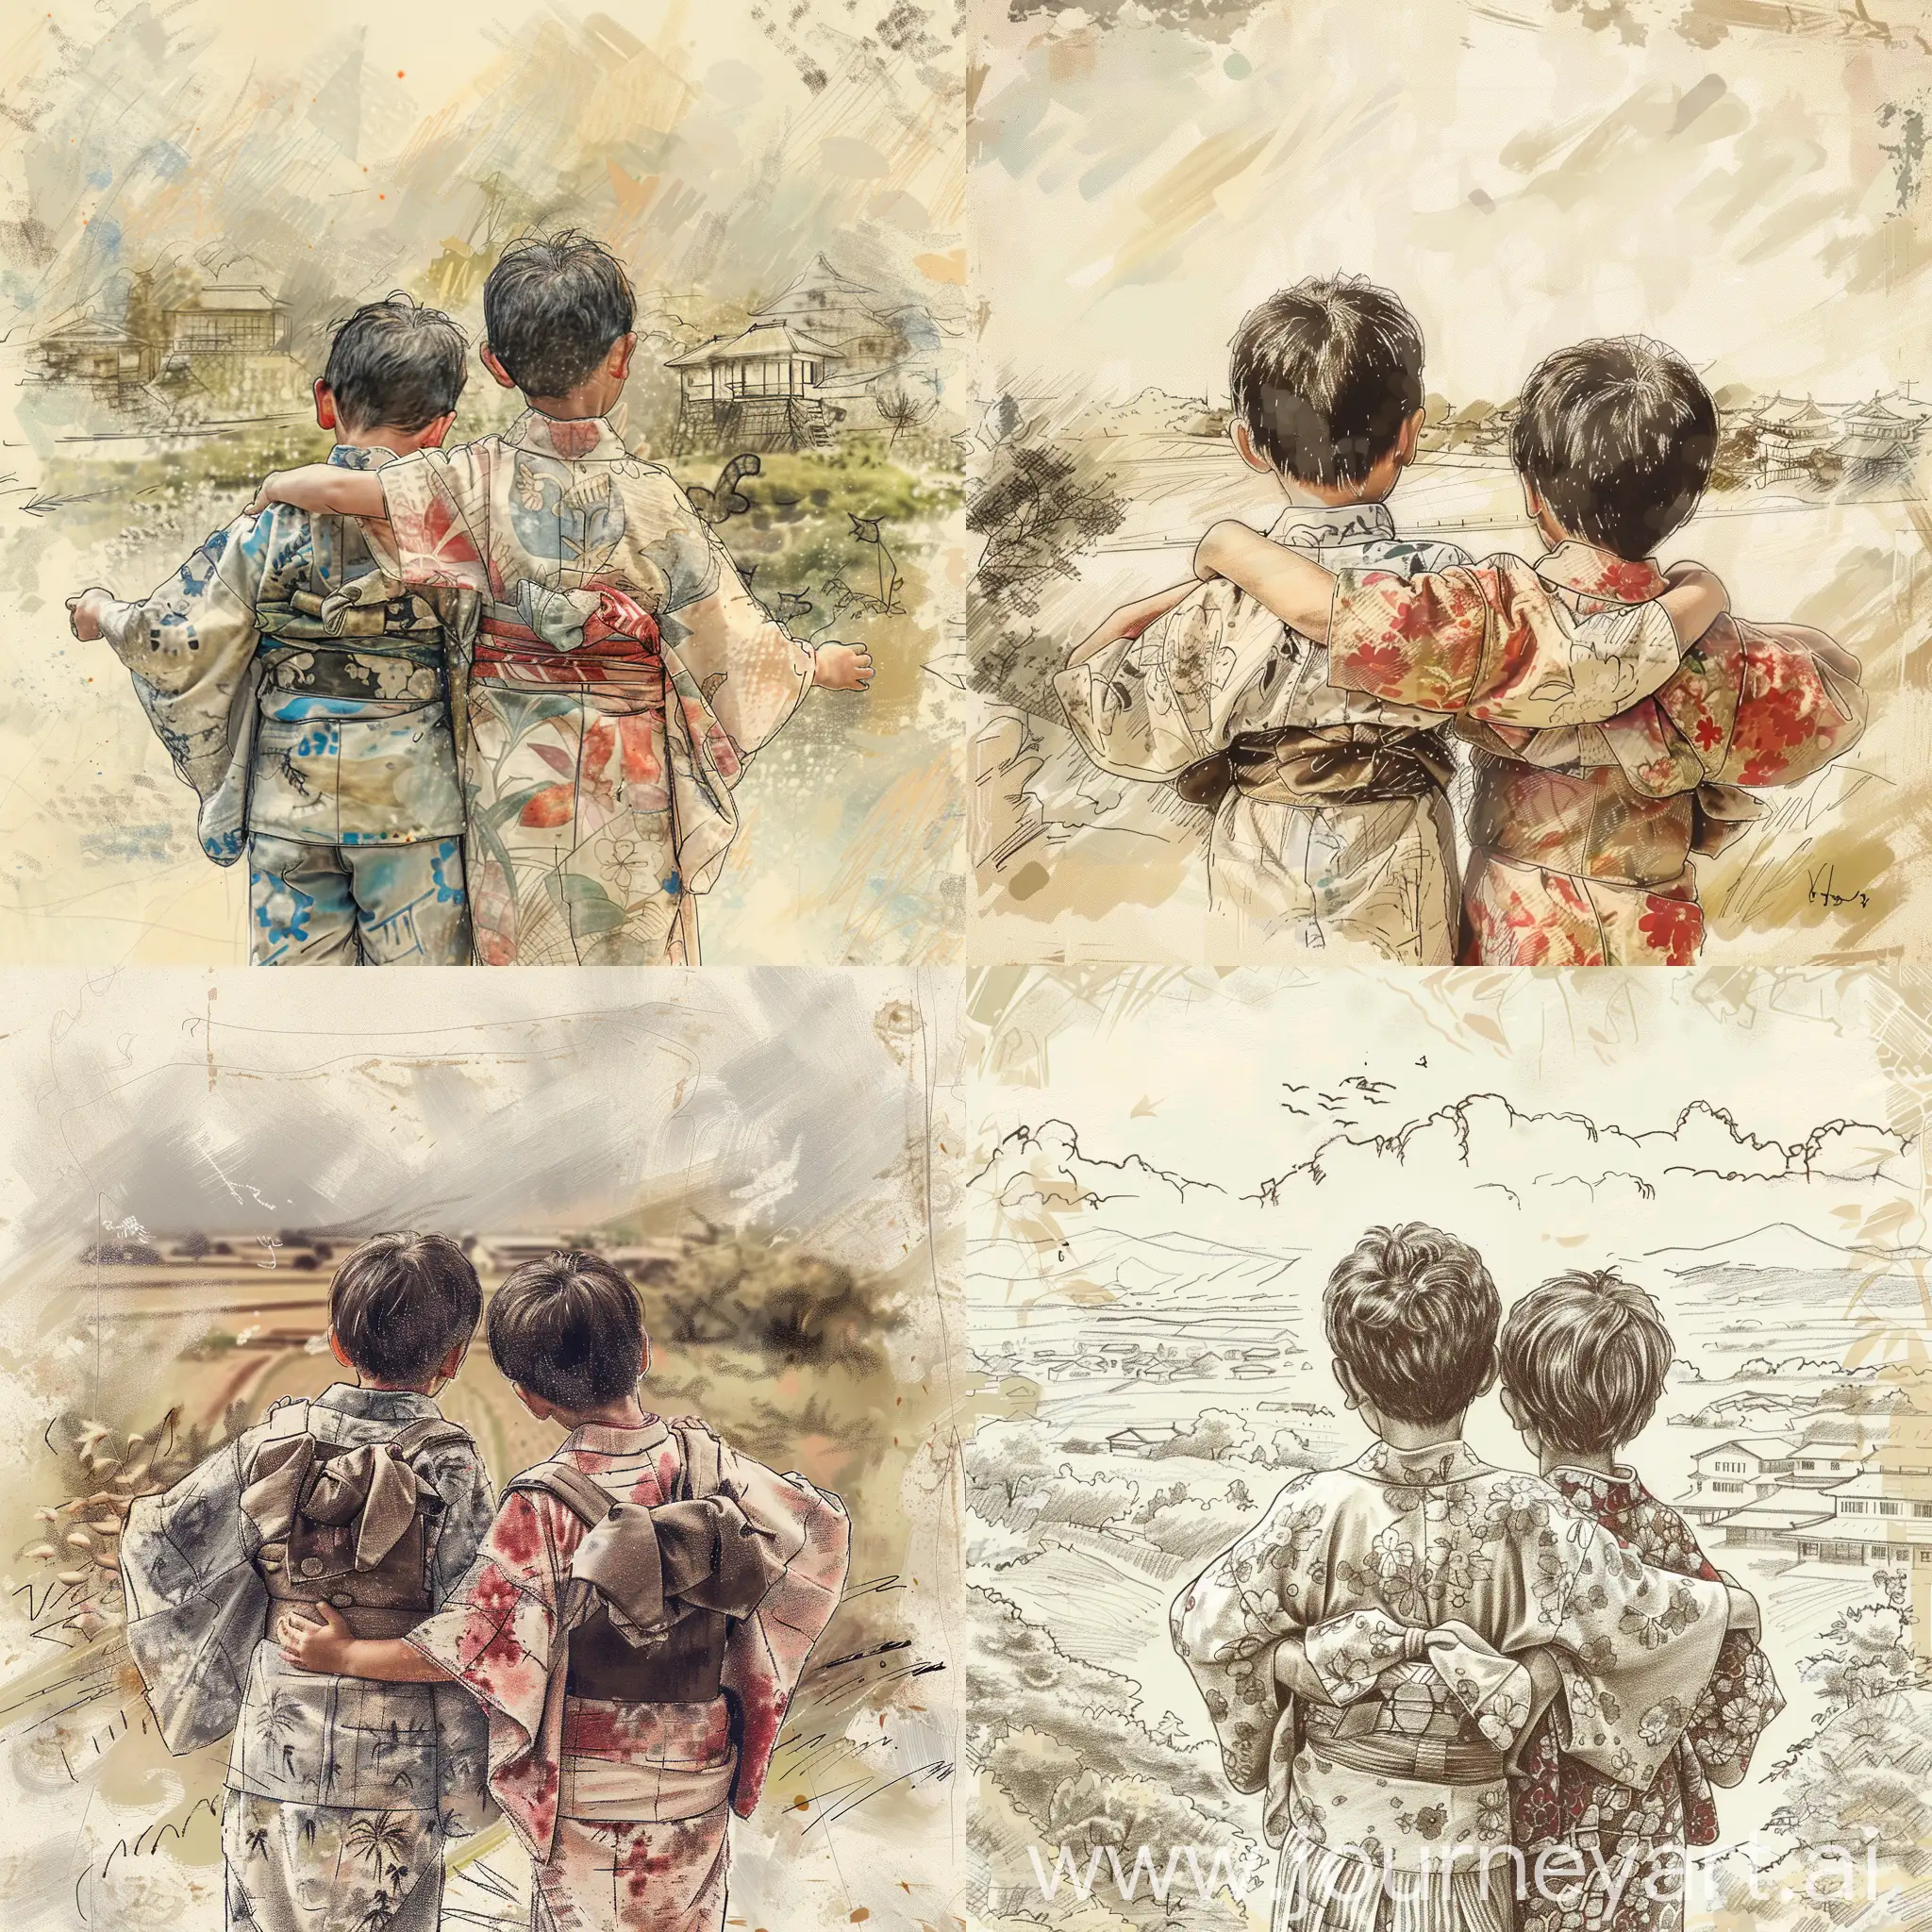 Two boy friends in old kimonos Japanese children look back with their arms around each other's shoulders. Japan has a rich tradition of storytelling and whimsical. Create a collaborative story that incorporates elements of these artistic styles. A turbulent past and the tenacious spirit of the Japanese people, preschool kids drawing, naive and unstrained touch of pencil scribbled, hand drawn, scrawled blur of Japanese countryside in the background. bird's eye view